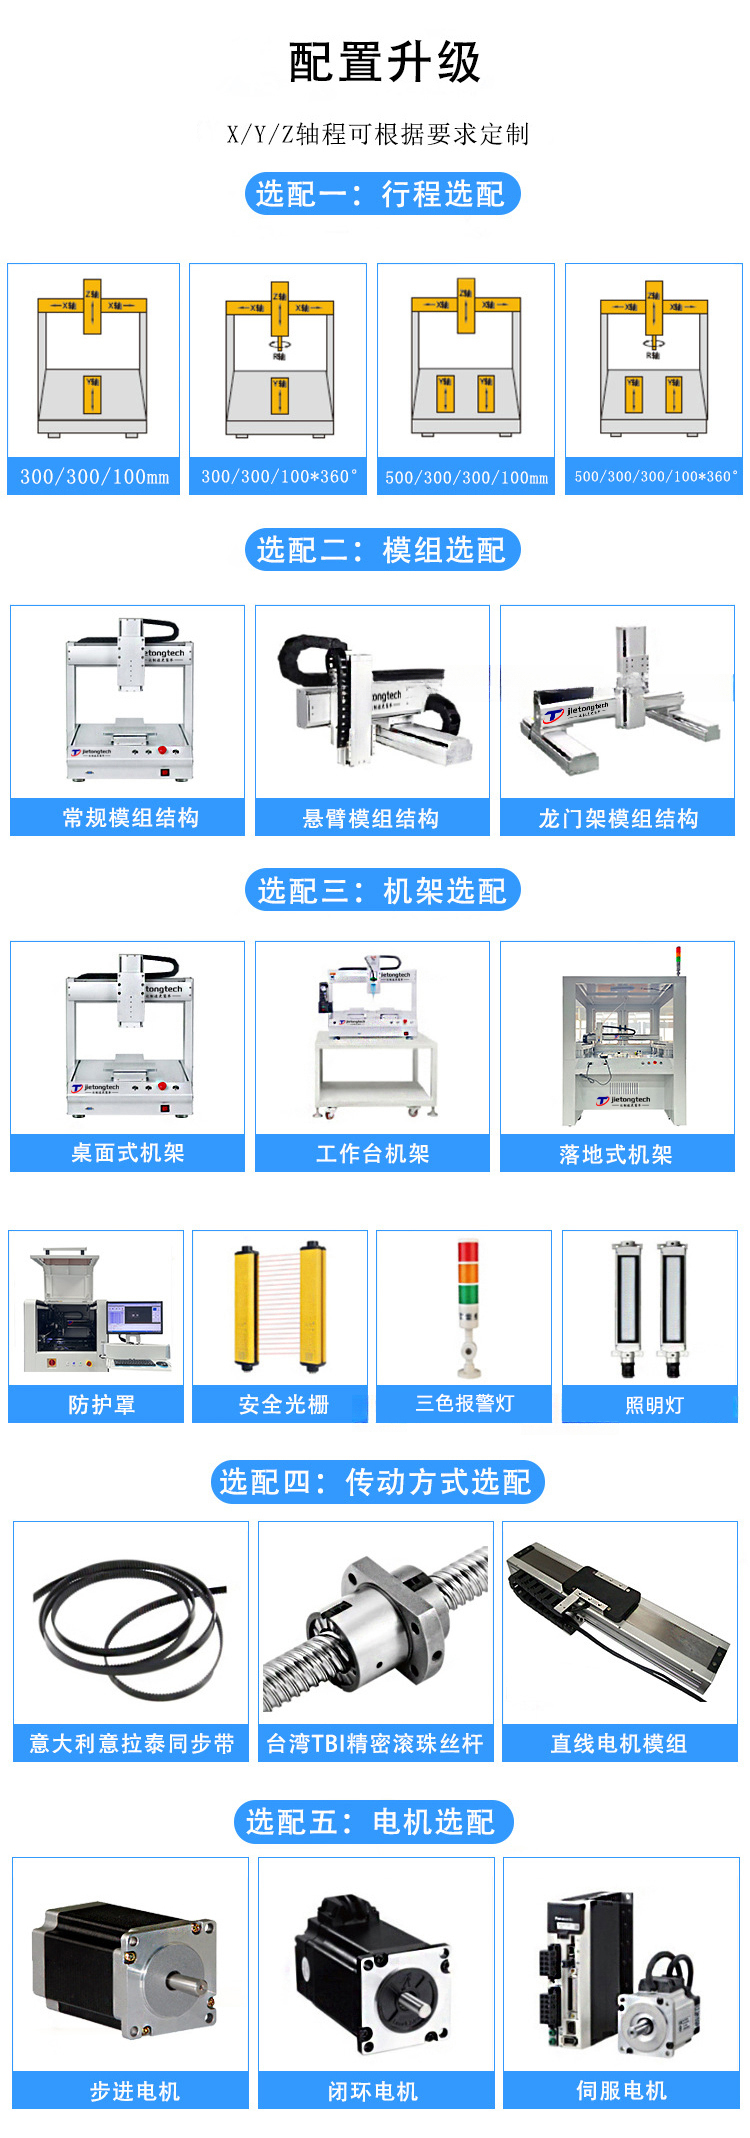 Automatic Soldering Machine for Tin Soldering Electronic Connector Cantilever Four Axis Soldering Equipment Intelligent Manufacturing System Stable and Efficient